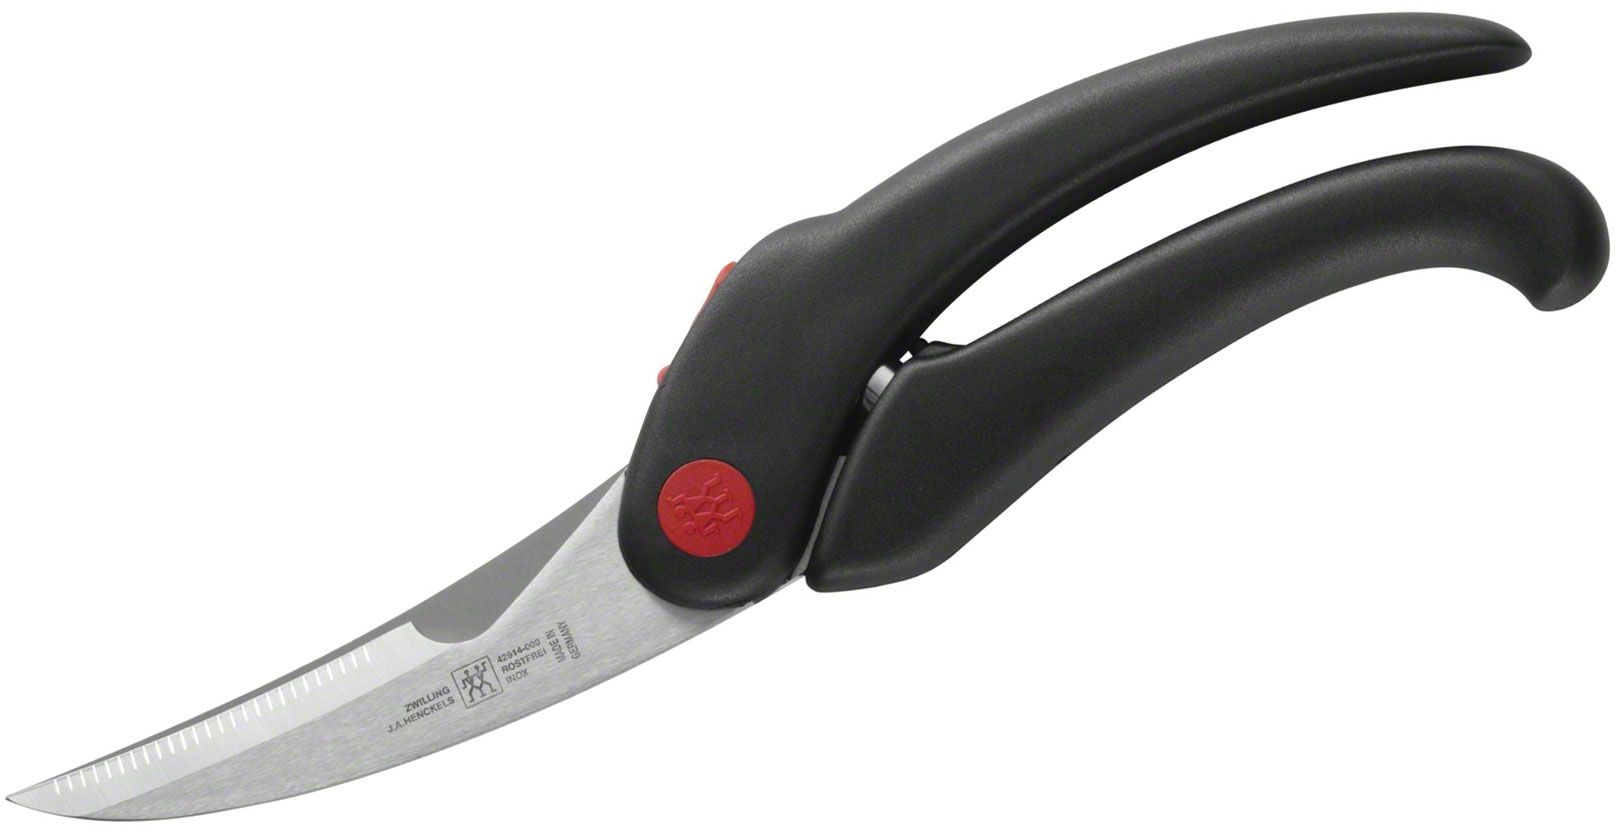 Zwilling J.A. Henckels Deluxe Poultry Shears - Serrated Edge